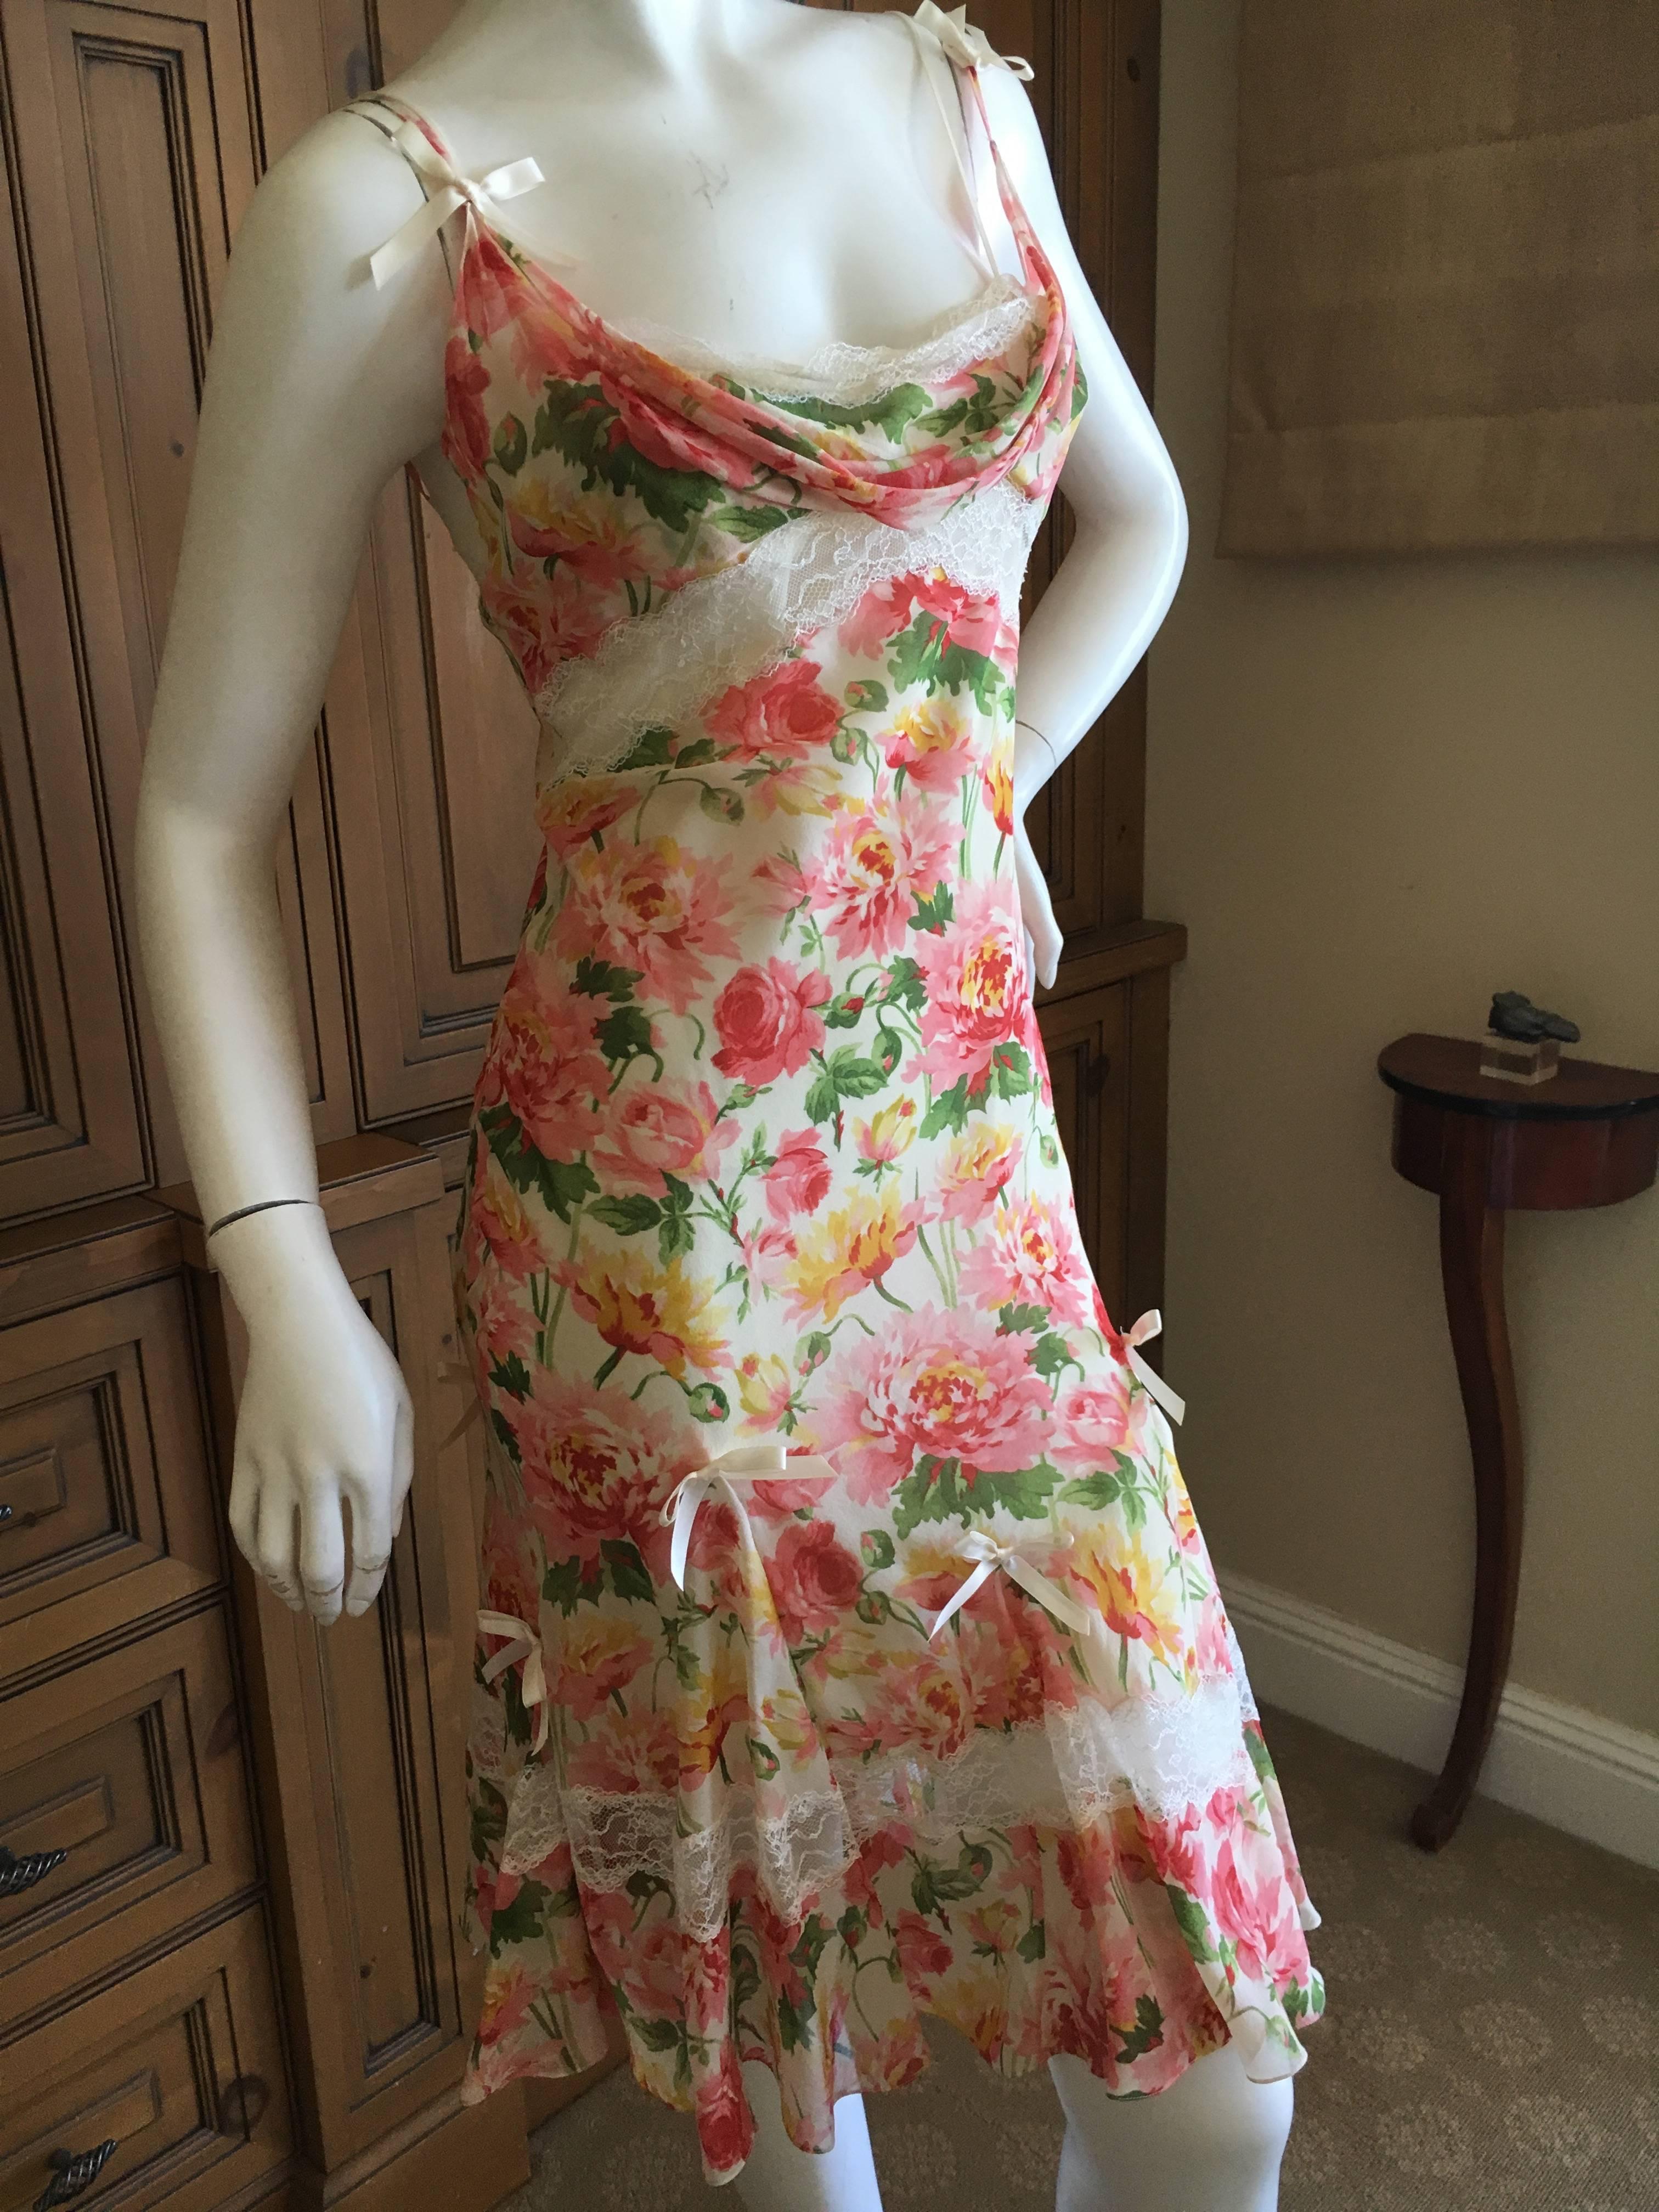 Christian Dior by John Galliano Romantic Silk Floral Dress with Sheer Lace Inserts.
This is so sweet , perfect for a summer garden party. 
Insets of sheer lace below the bust and at knee length, with little bow's.
Size 38
Bust 38"
Waist